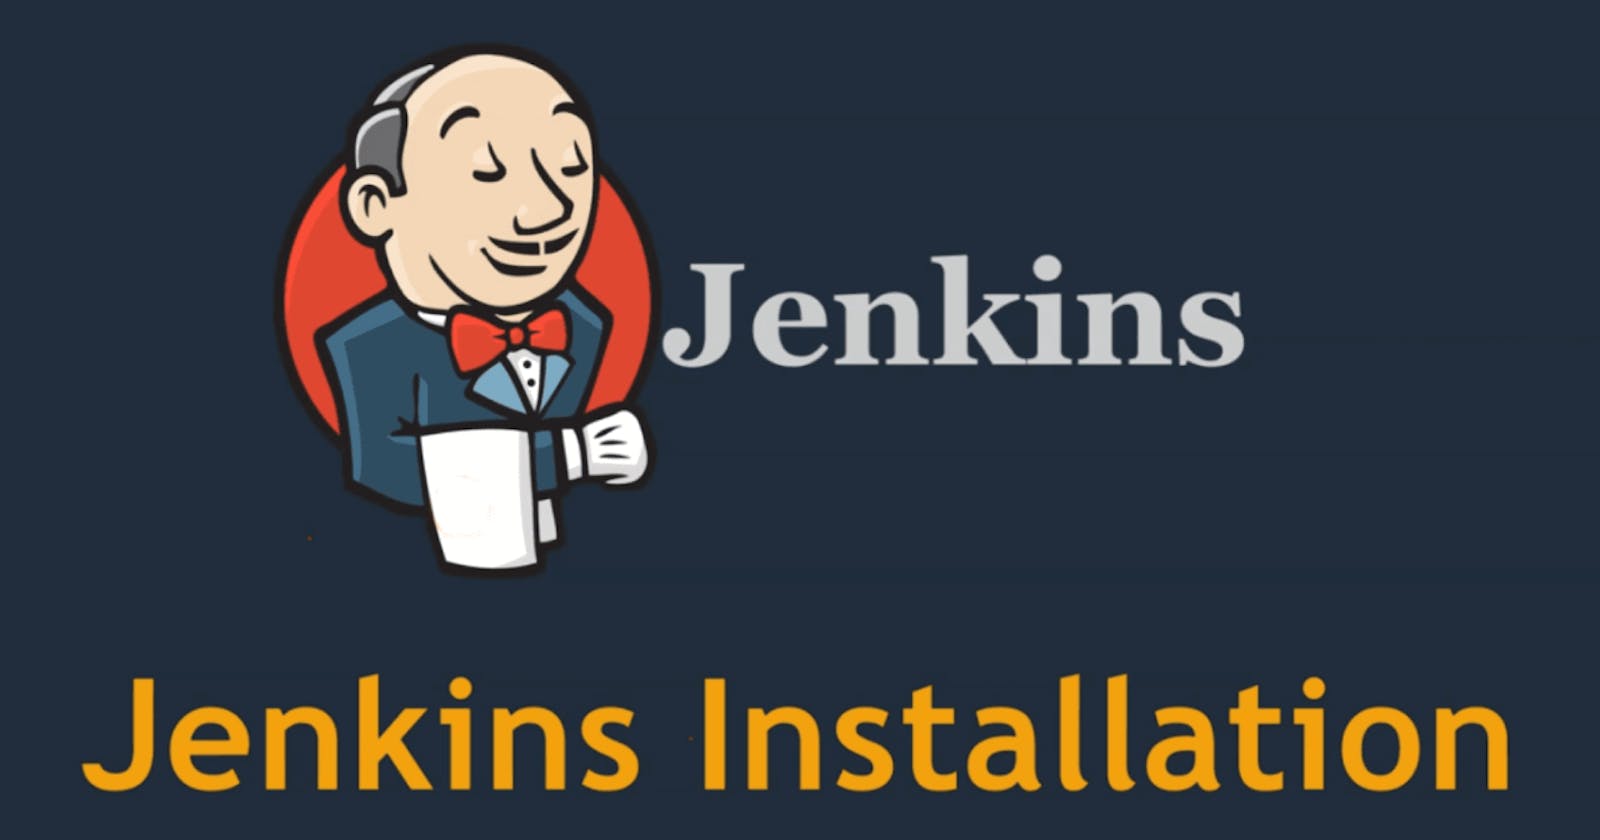 📂Day 22 - Getting Started with Jenkins